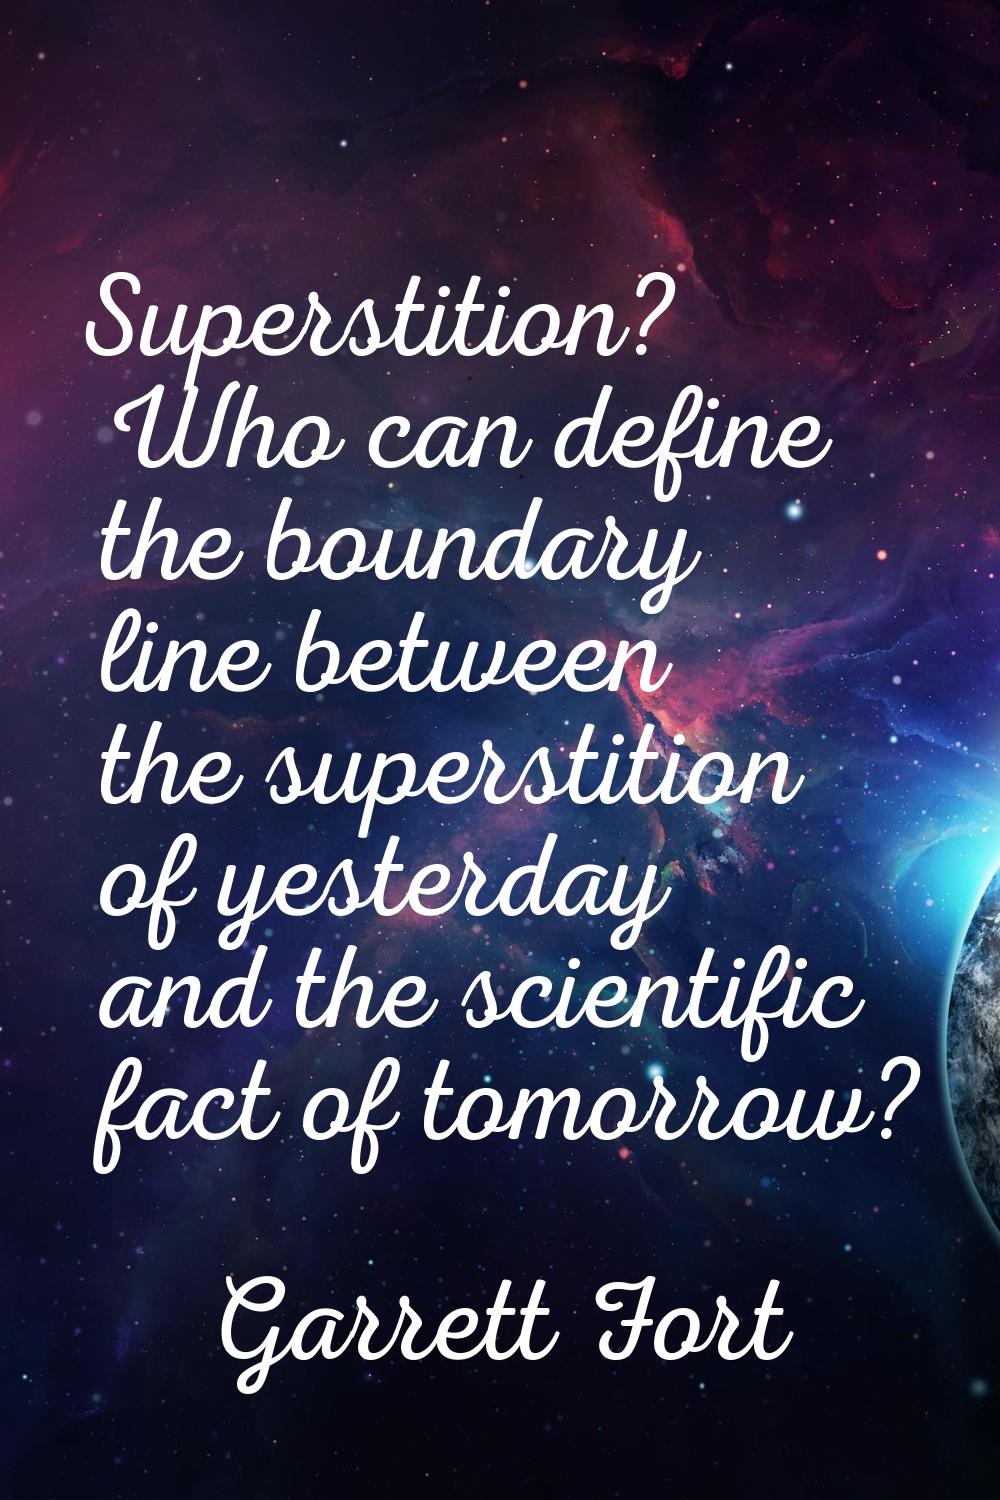 Superstition? Who can define the boundary line between the superstition of yesterday and the scient